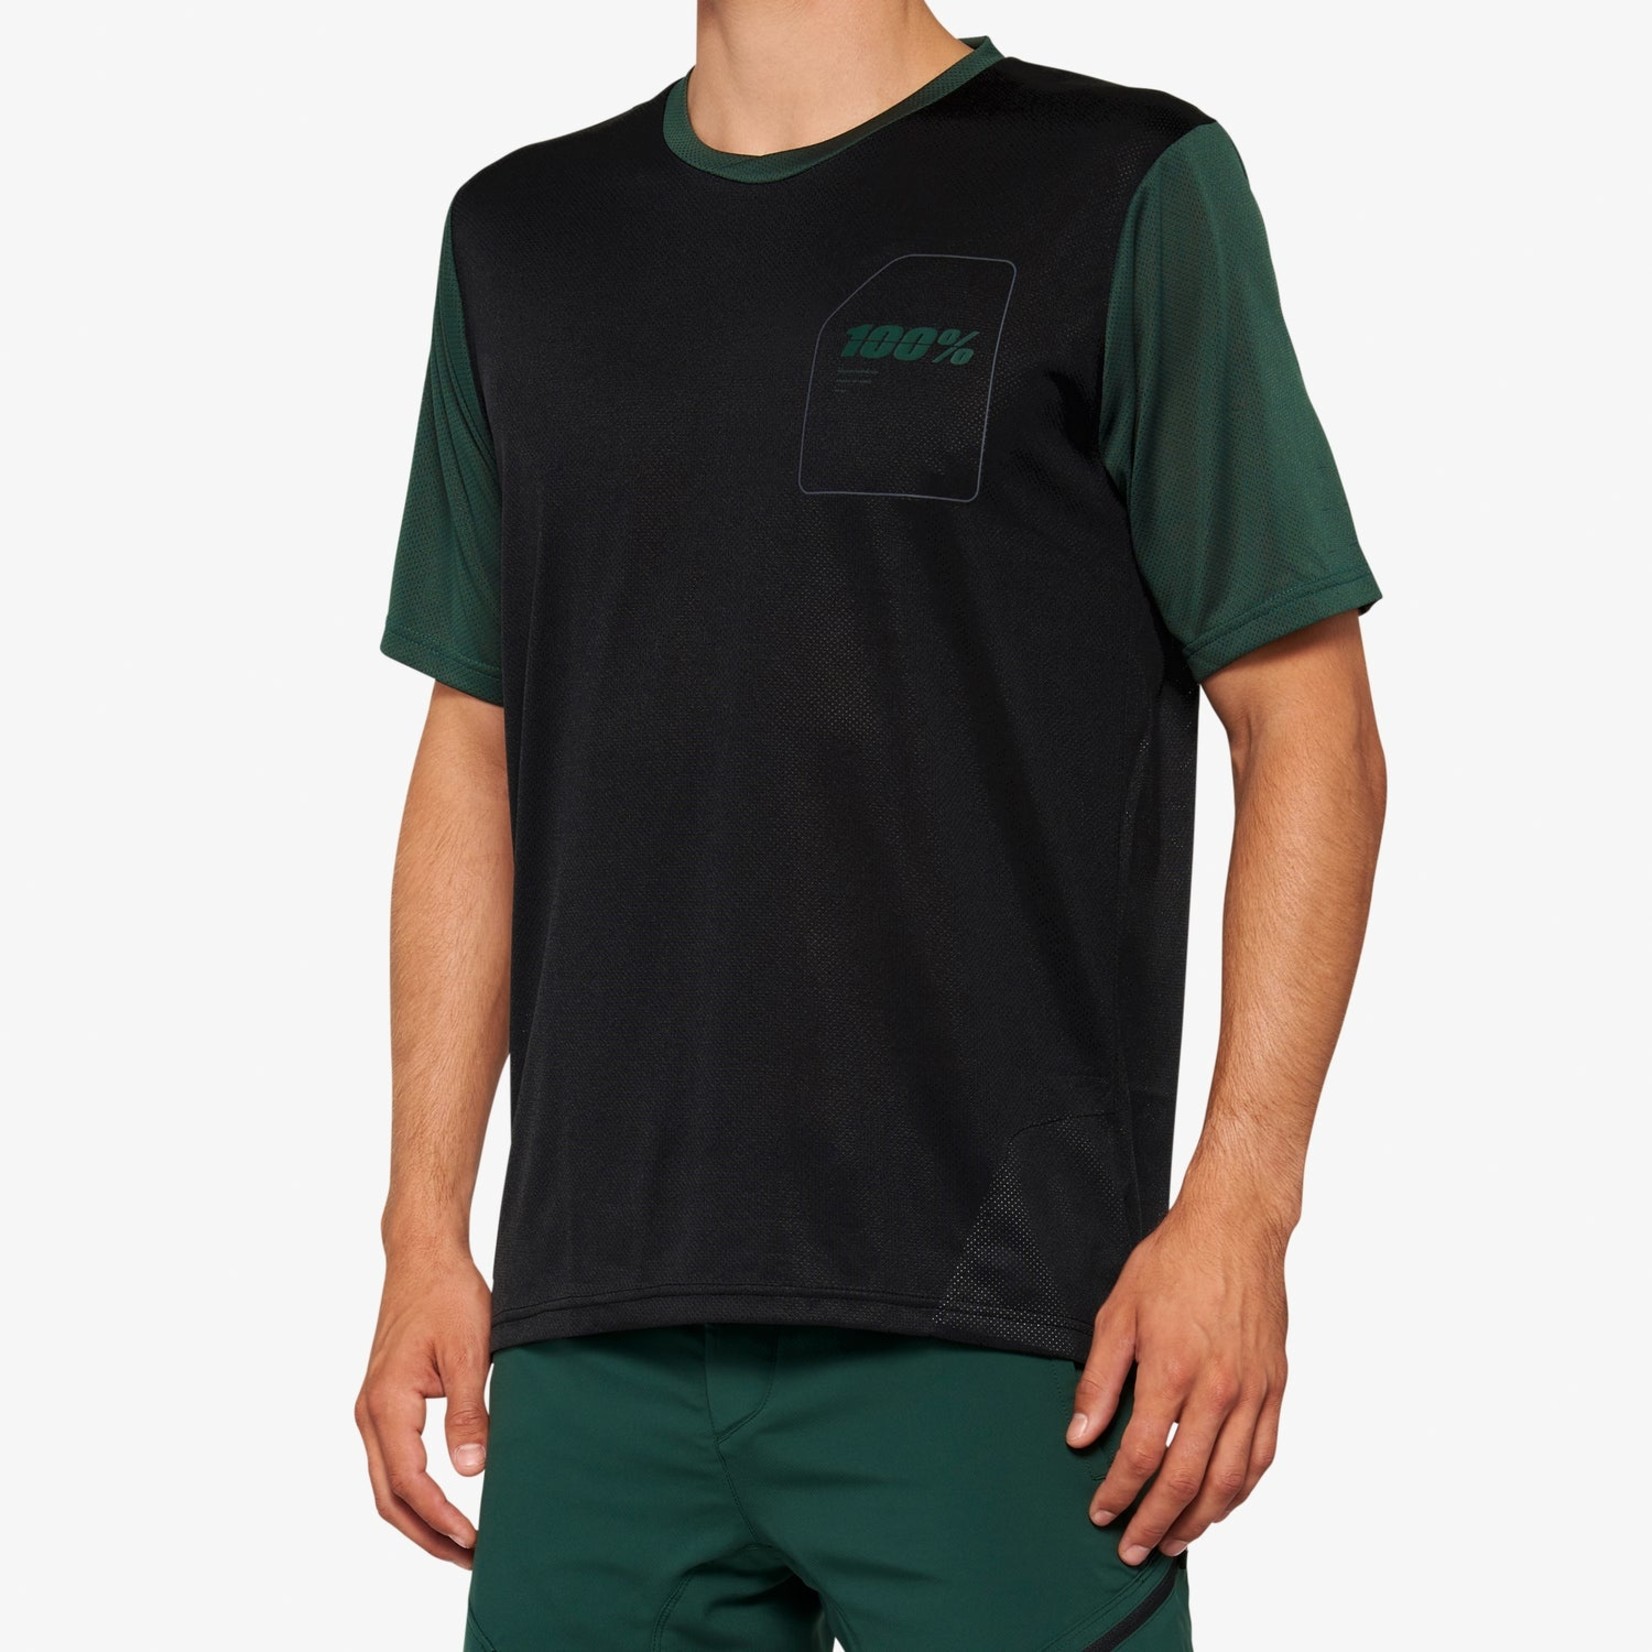 100 Percent 100% Ridecamp All Mountain Short Sleeve Jersey